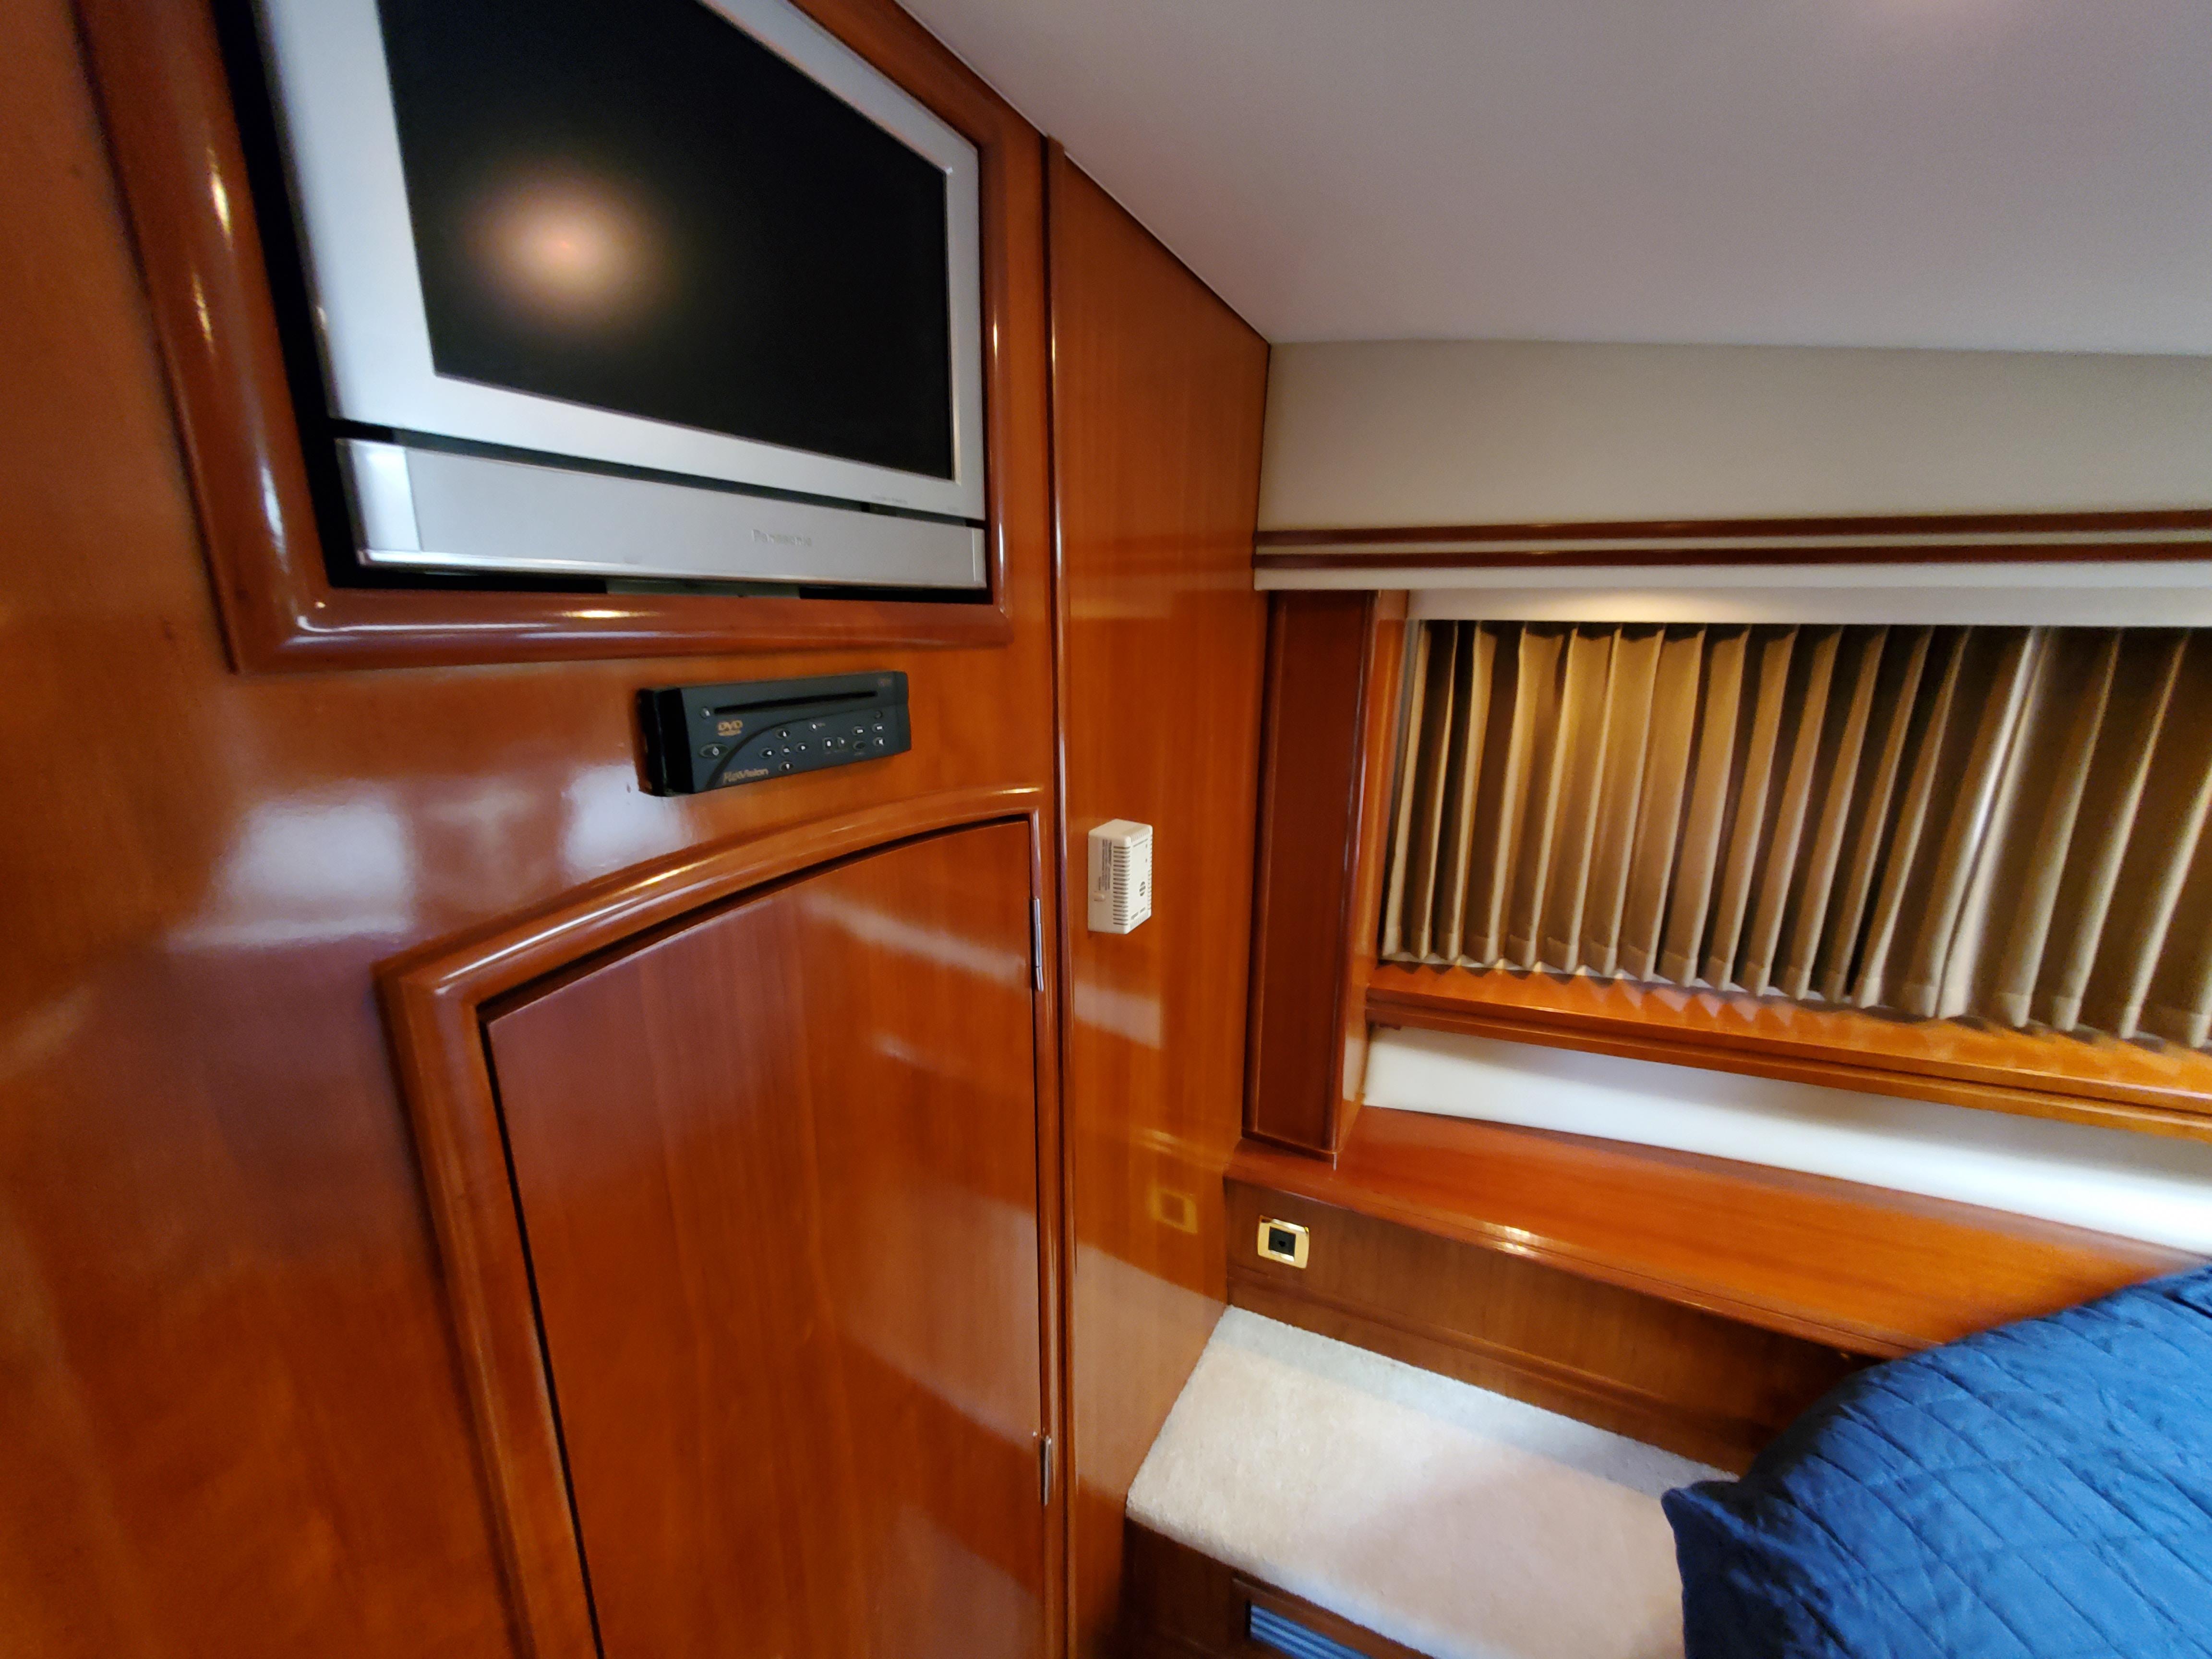 2003 Carver 570 Voyager Pilothouse